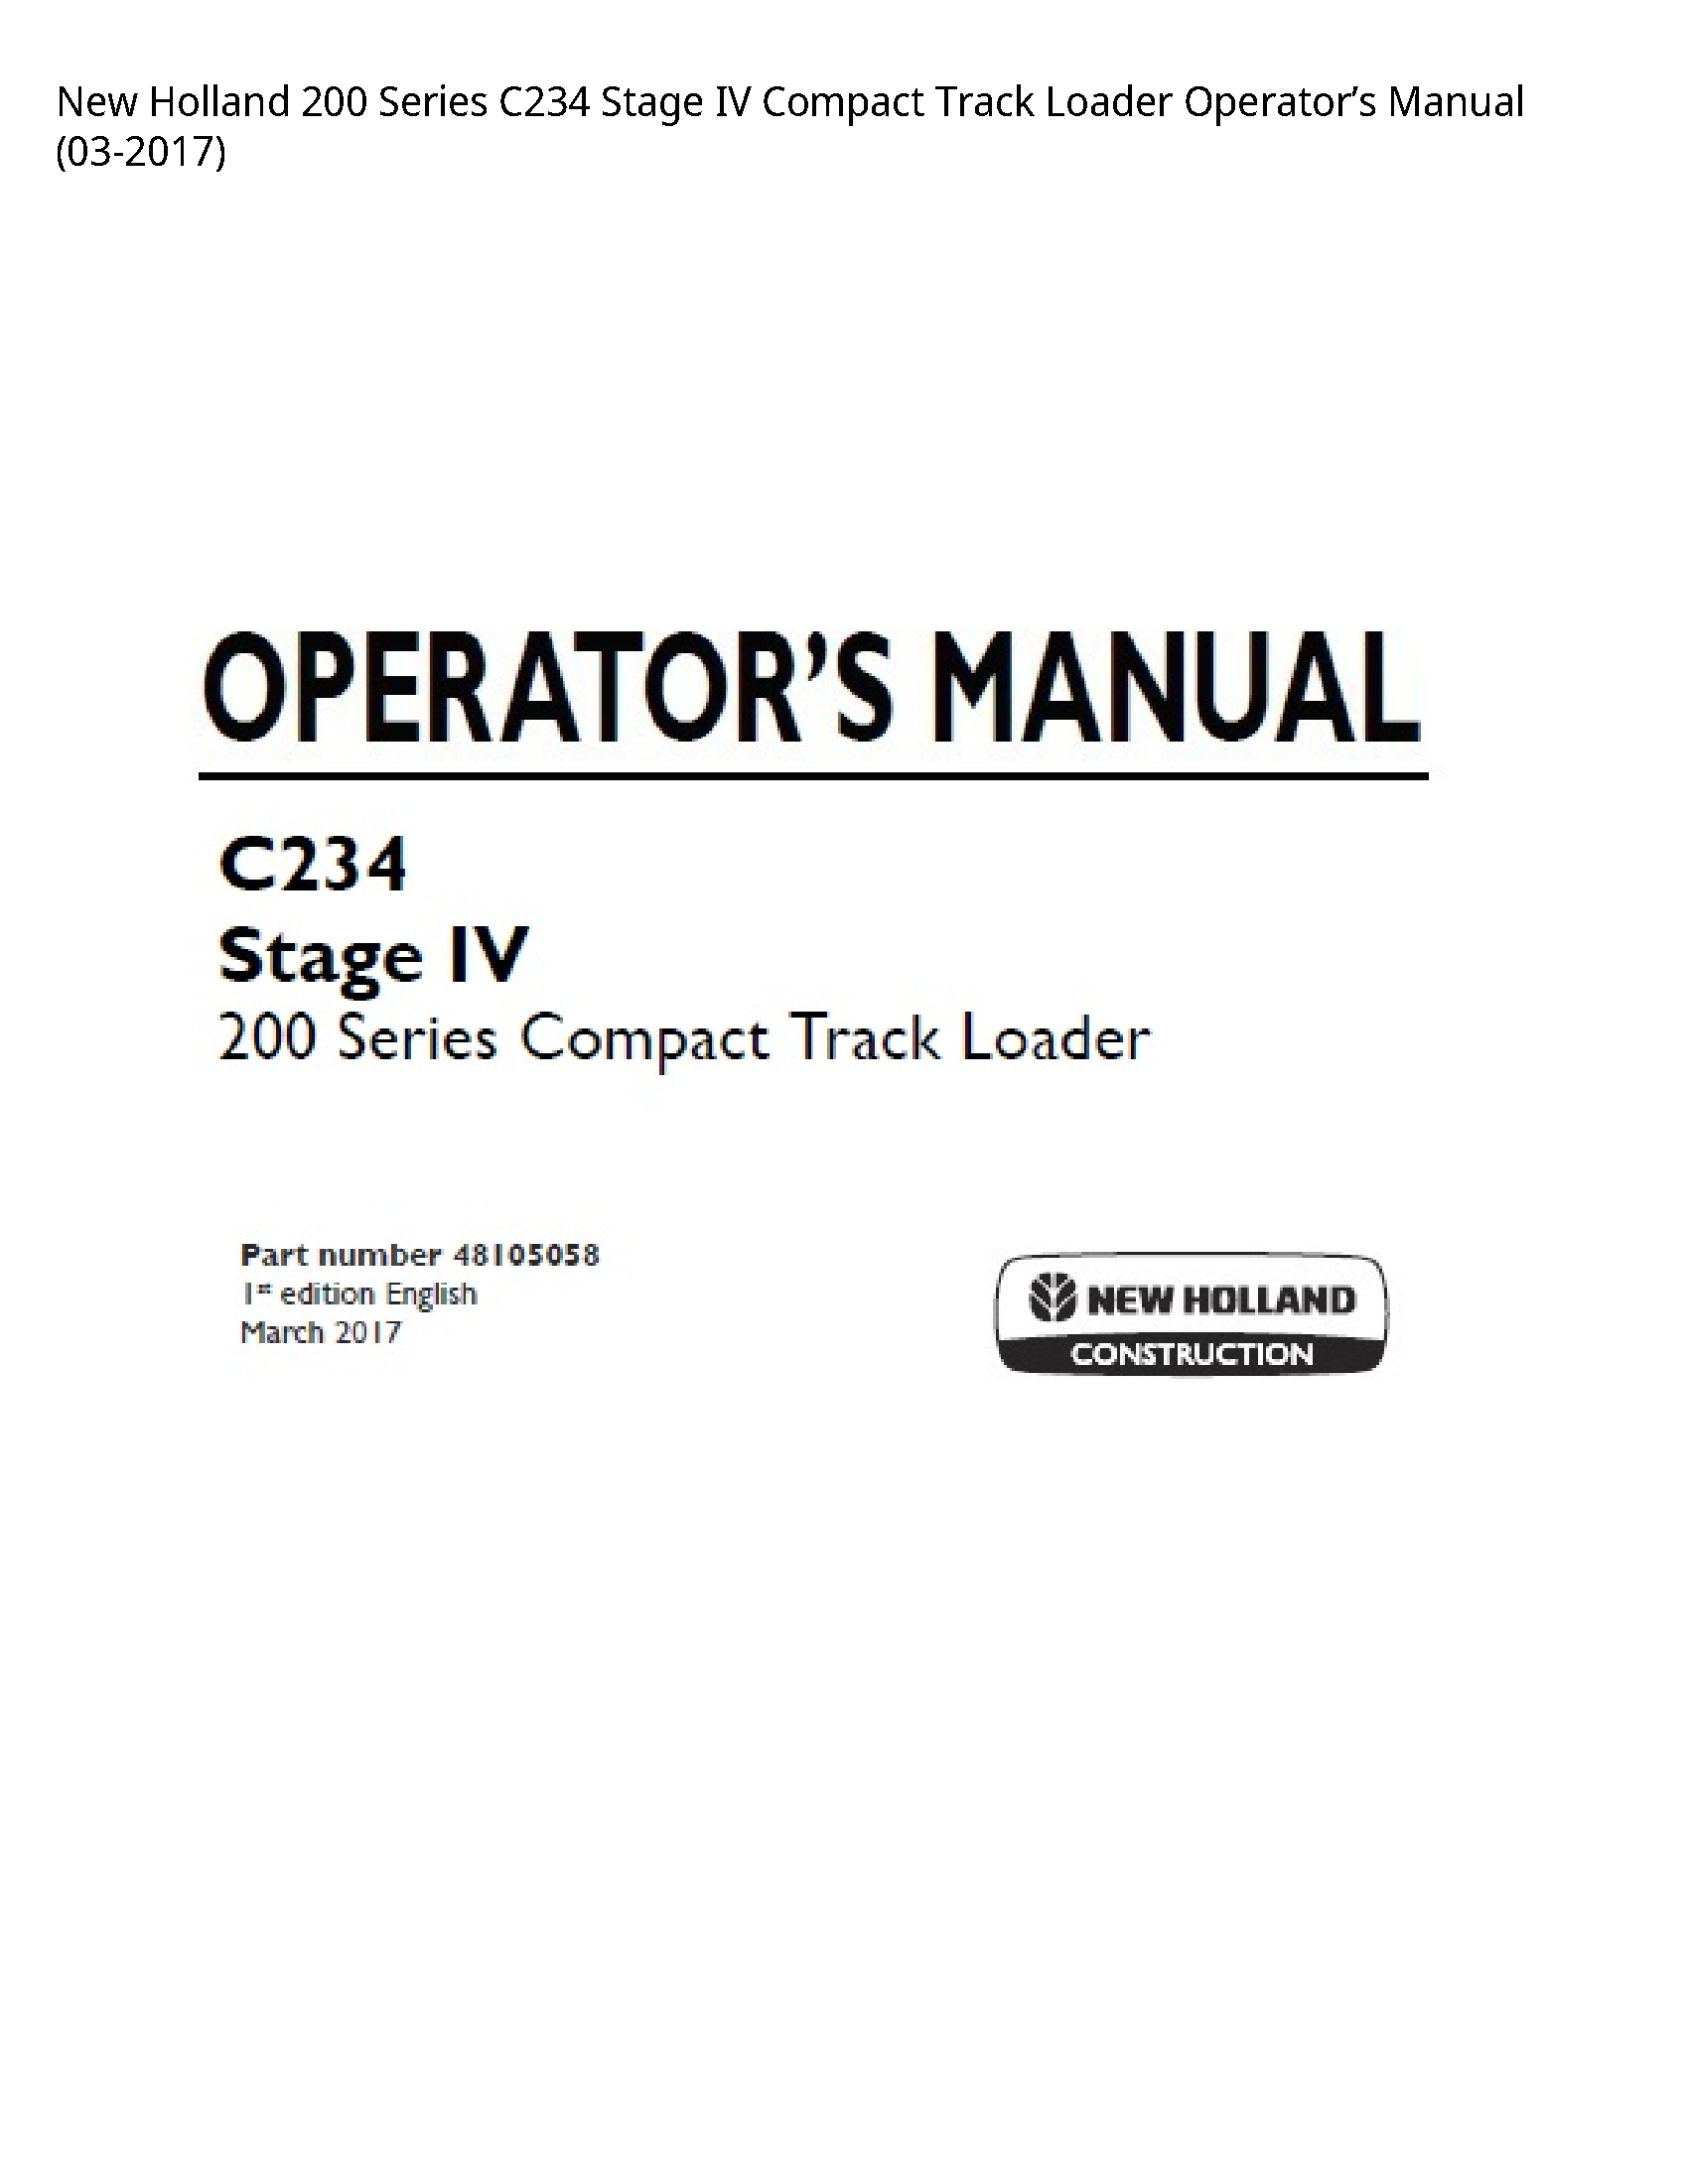 New Holland 200 Series Stage IV Compact Track Loader Operator’s manual